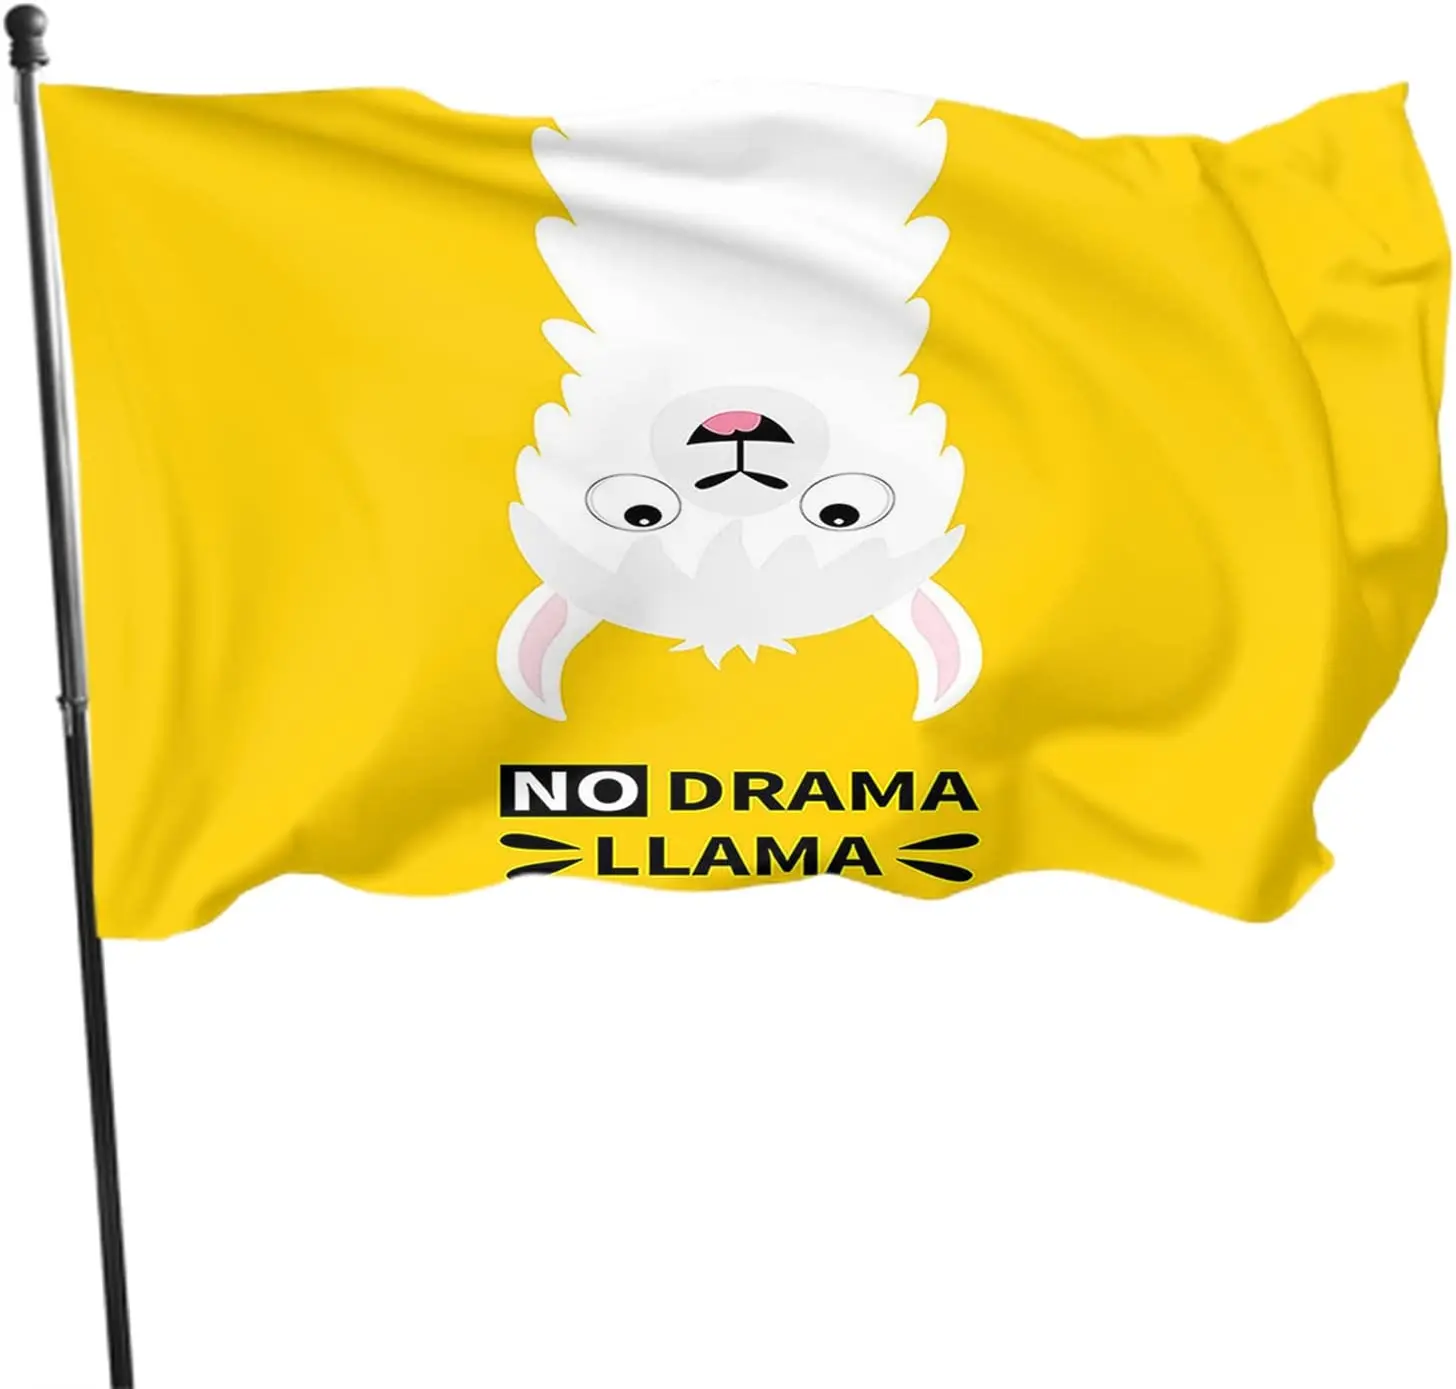 

Llama Flag 3x5 FT Cute Animal White Alpaca with Word No Drama Llama Outdoor Flags Large Welcome Yard Banners Home Garden